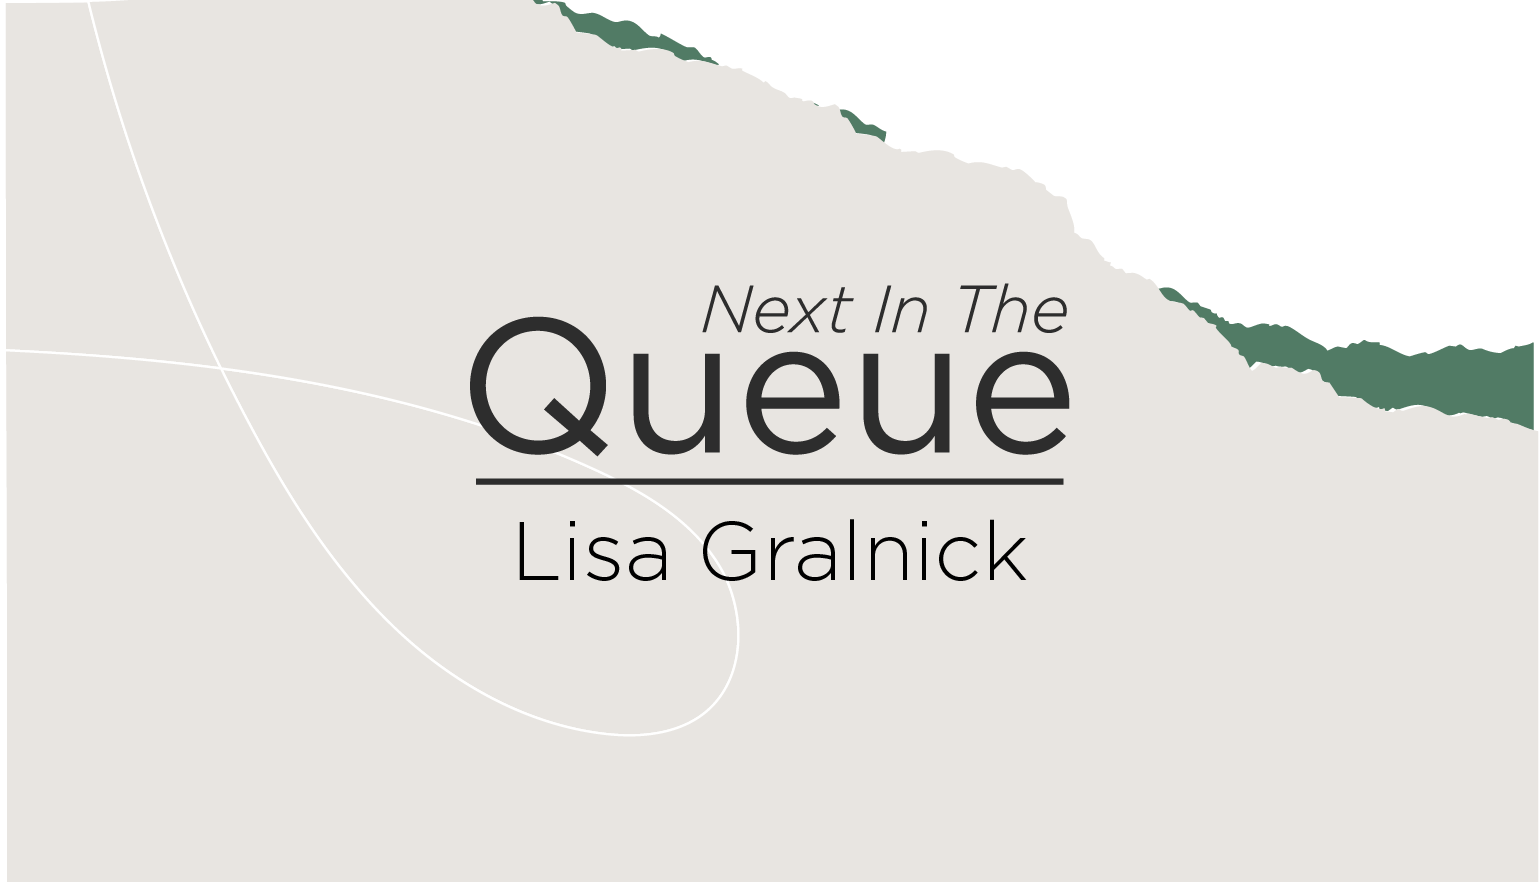 blog post cover graphic for The Queue featuring Lisa Gralnick